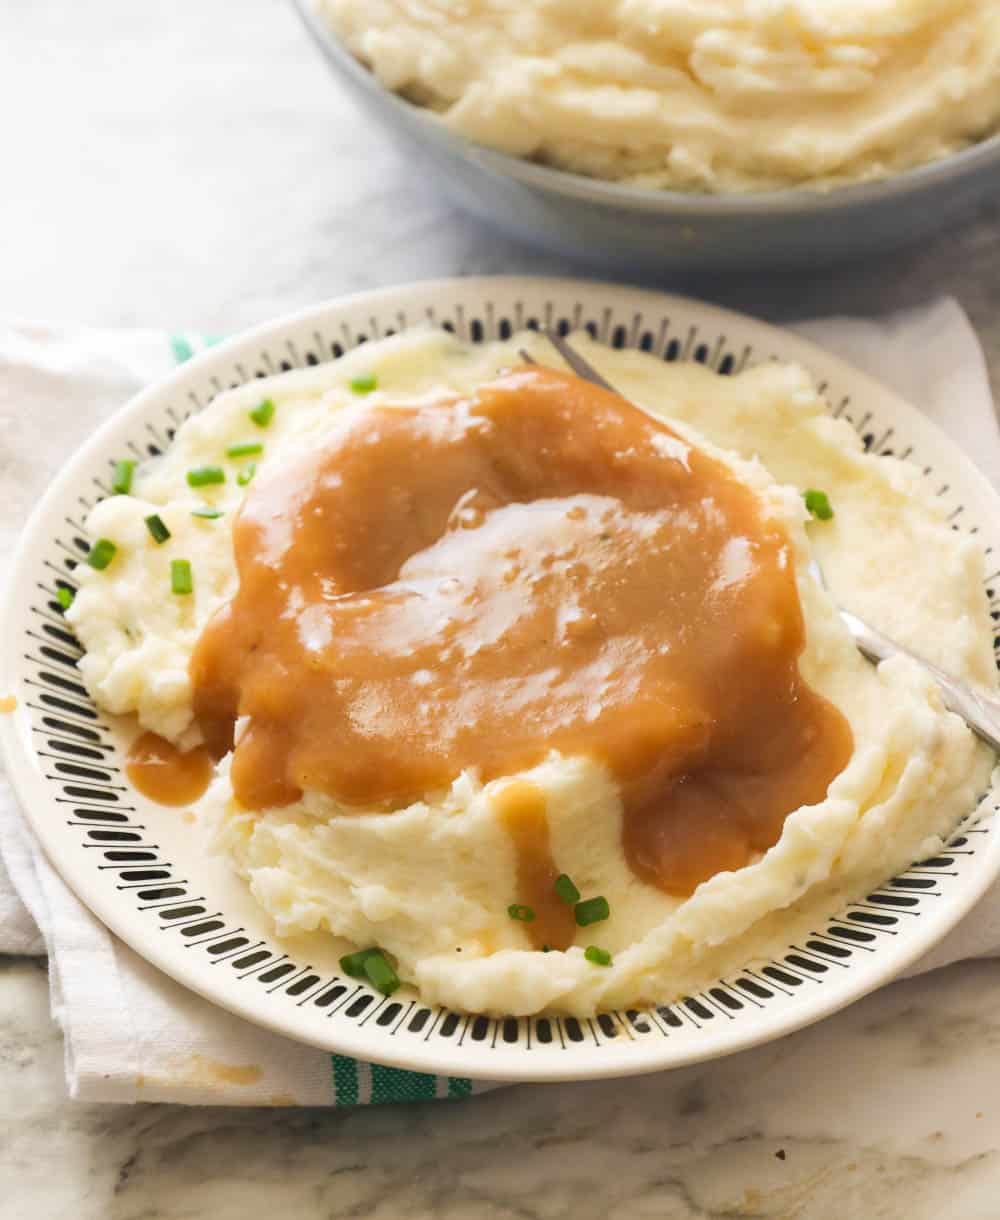 Mashed Potatoes Poured with Brown Gravy